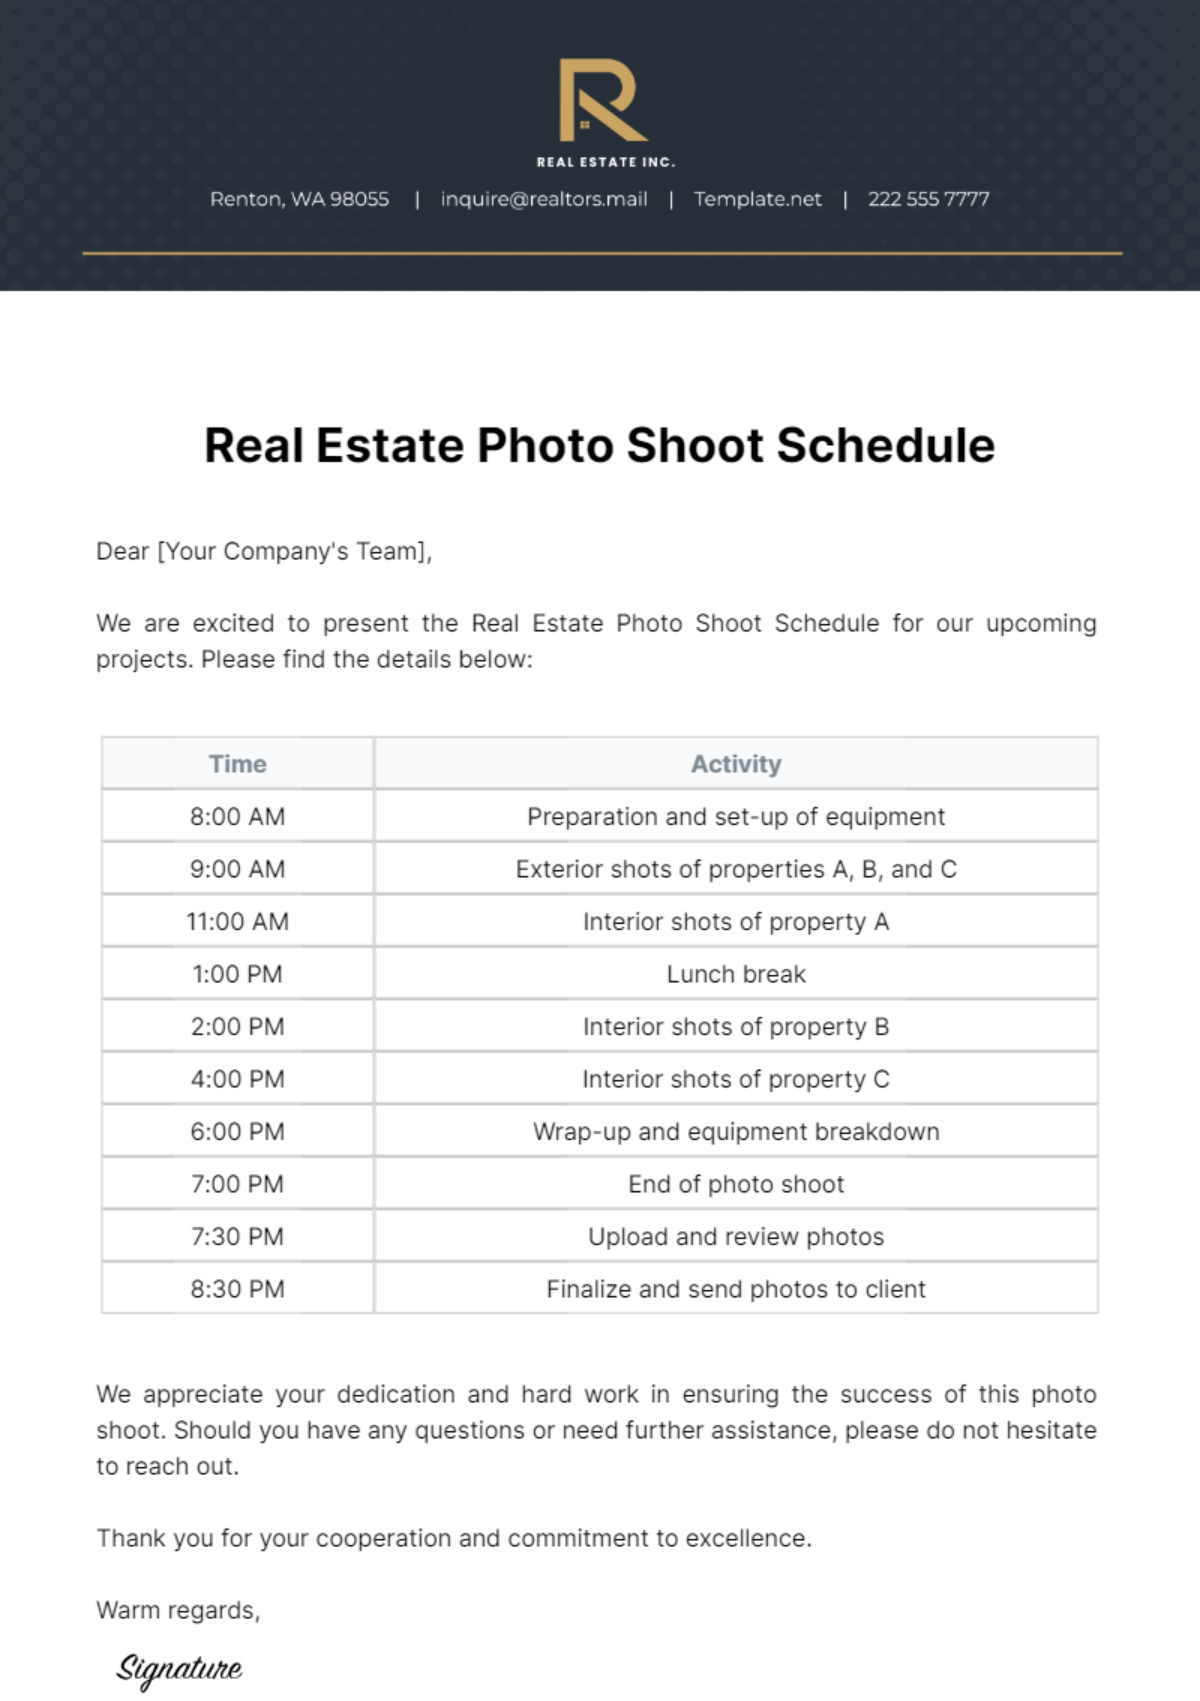 Real Estate Photo Shoot Schedule Template